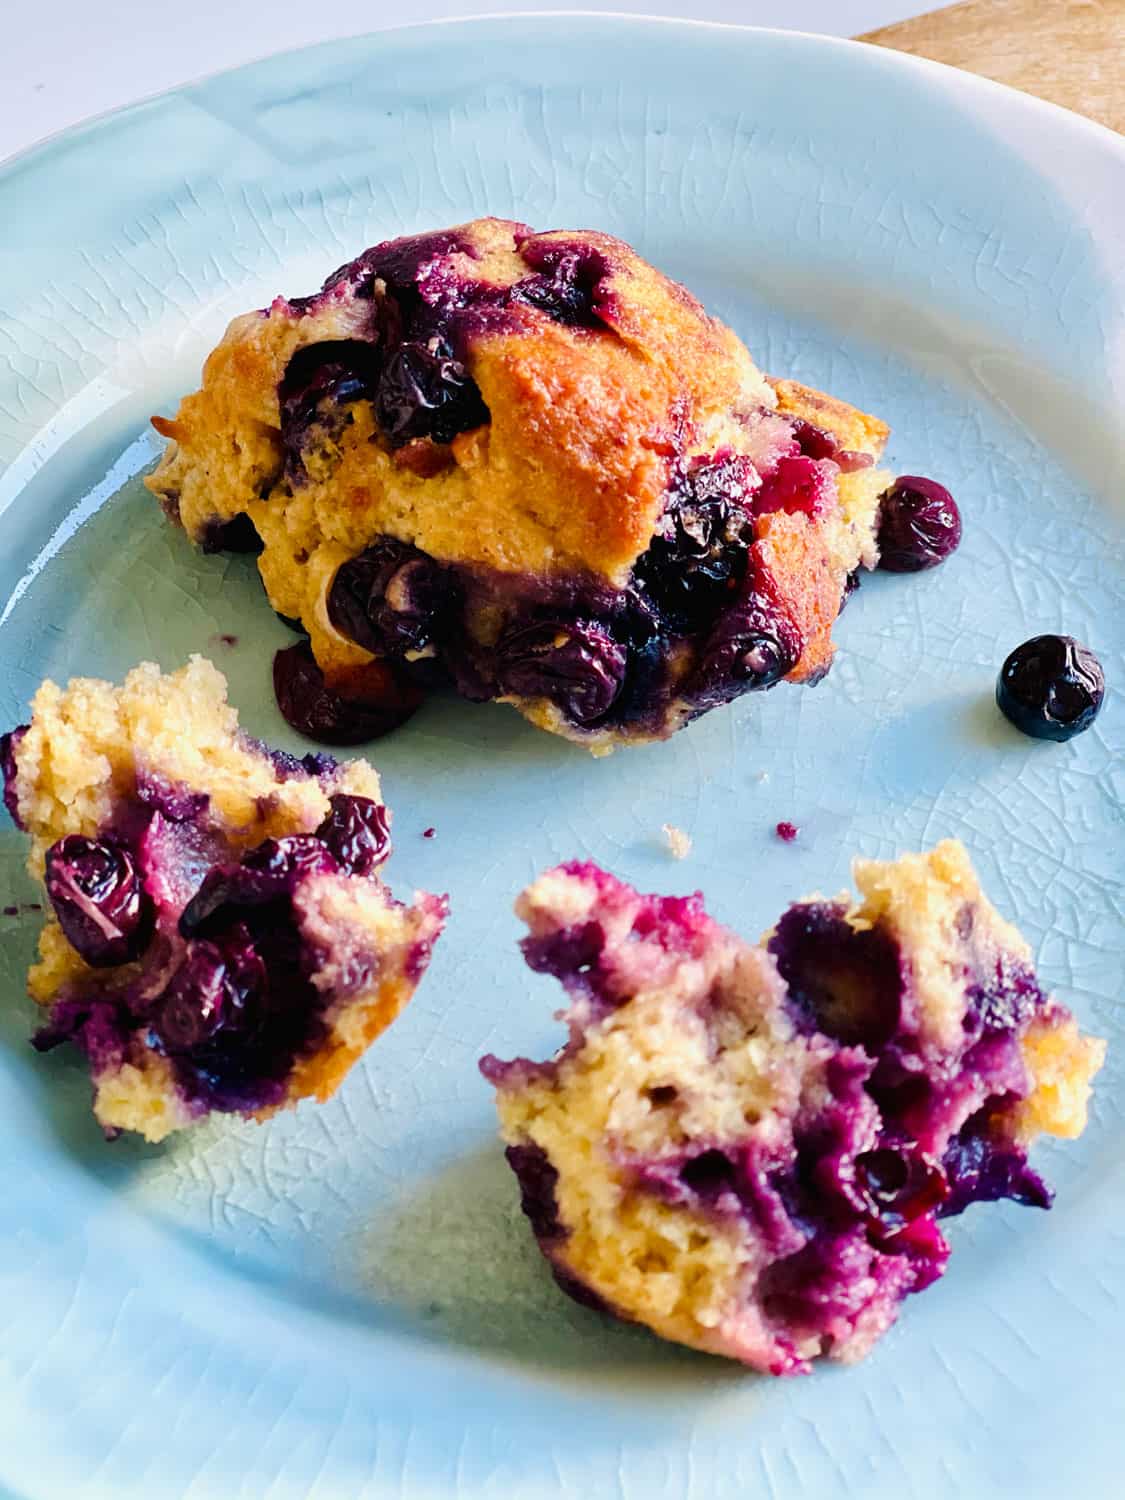 Healthy Blueberry muffins